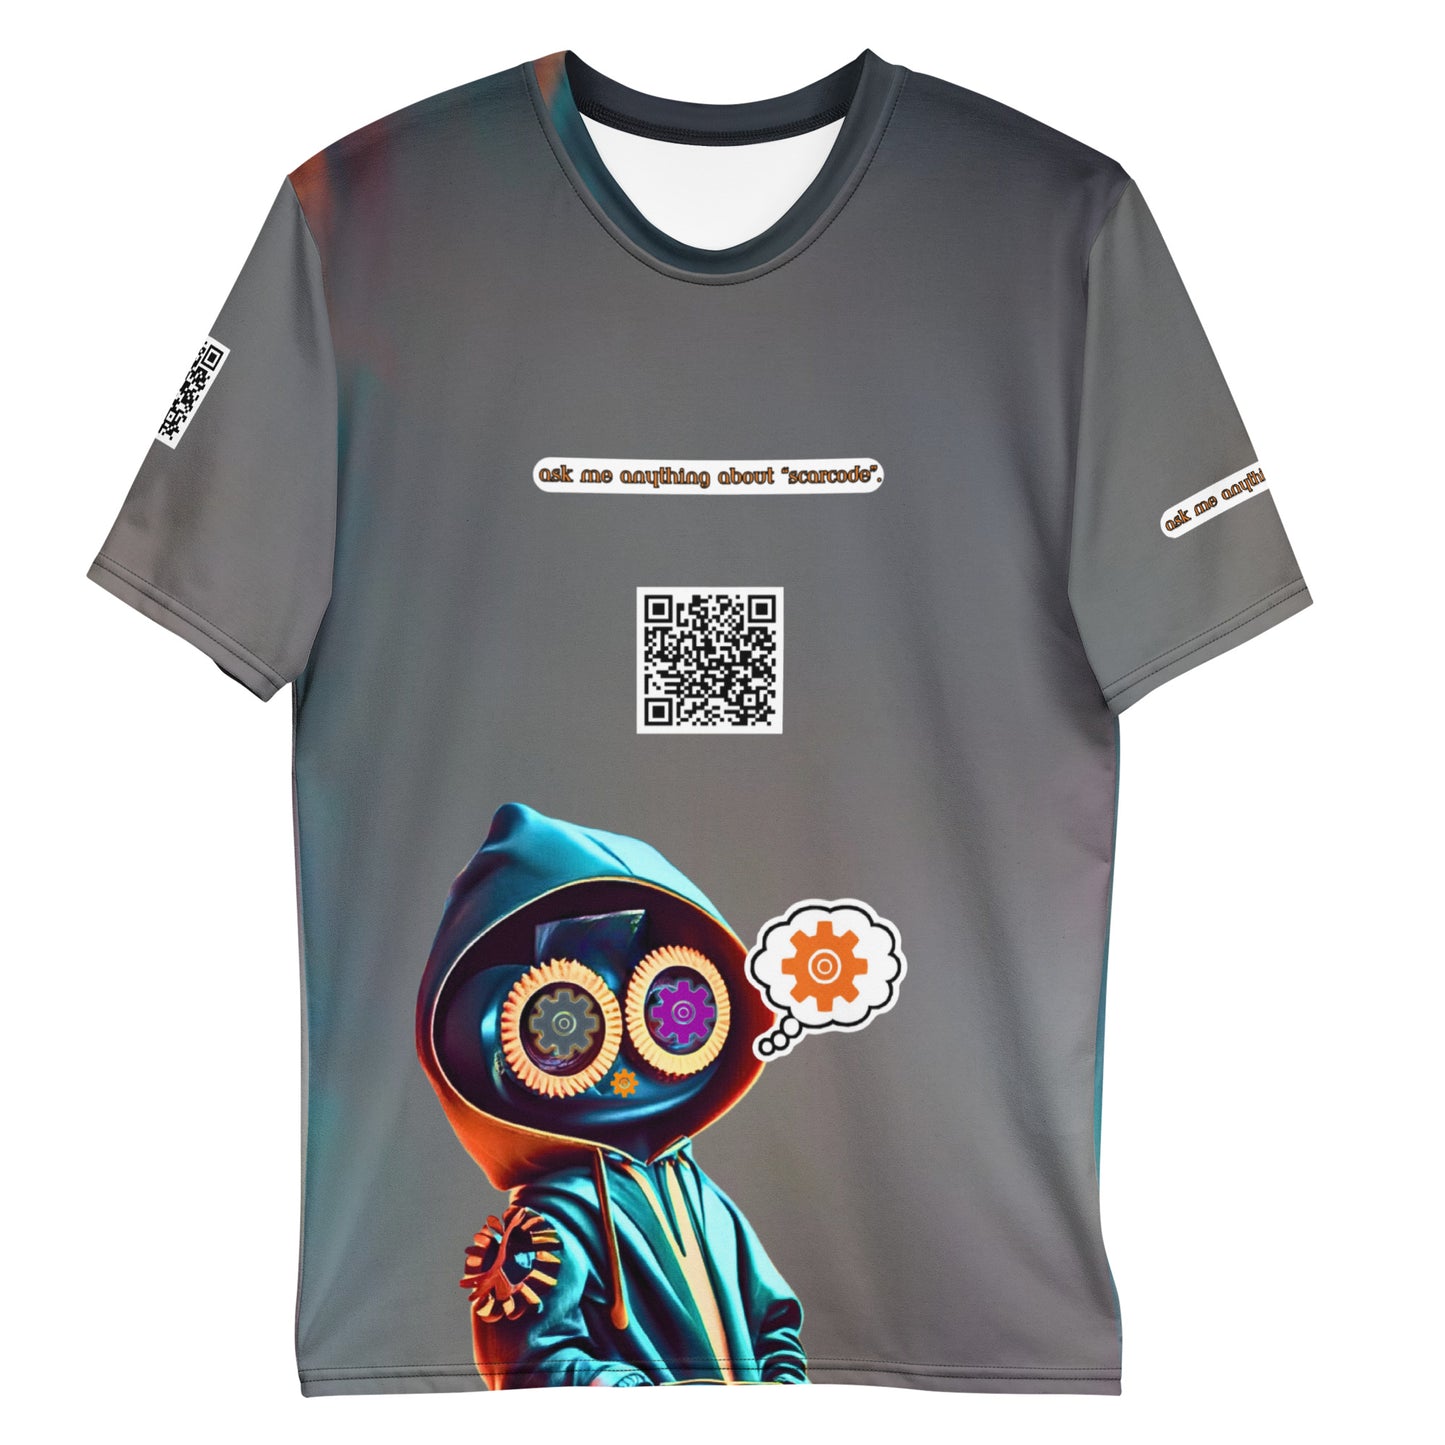 Scarcode AI Bot "Ask me anything about Scarcode" QR Code T-Shirt - 6 SCRCDE